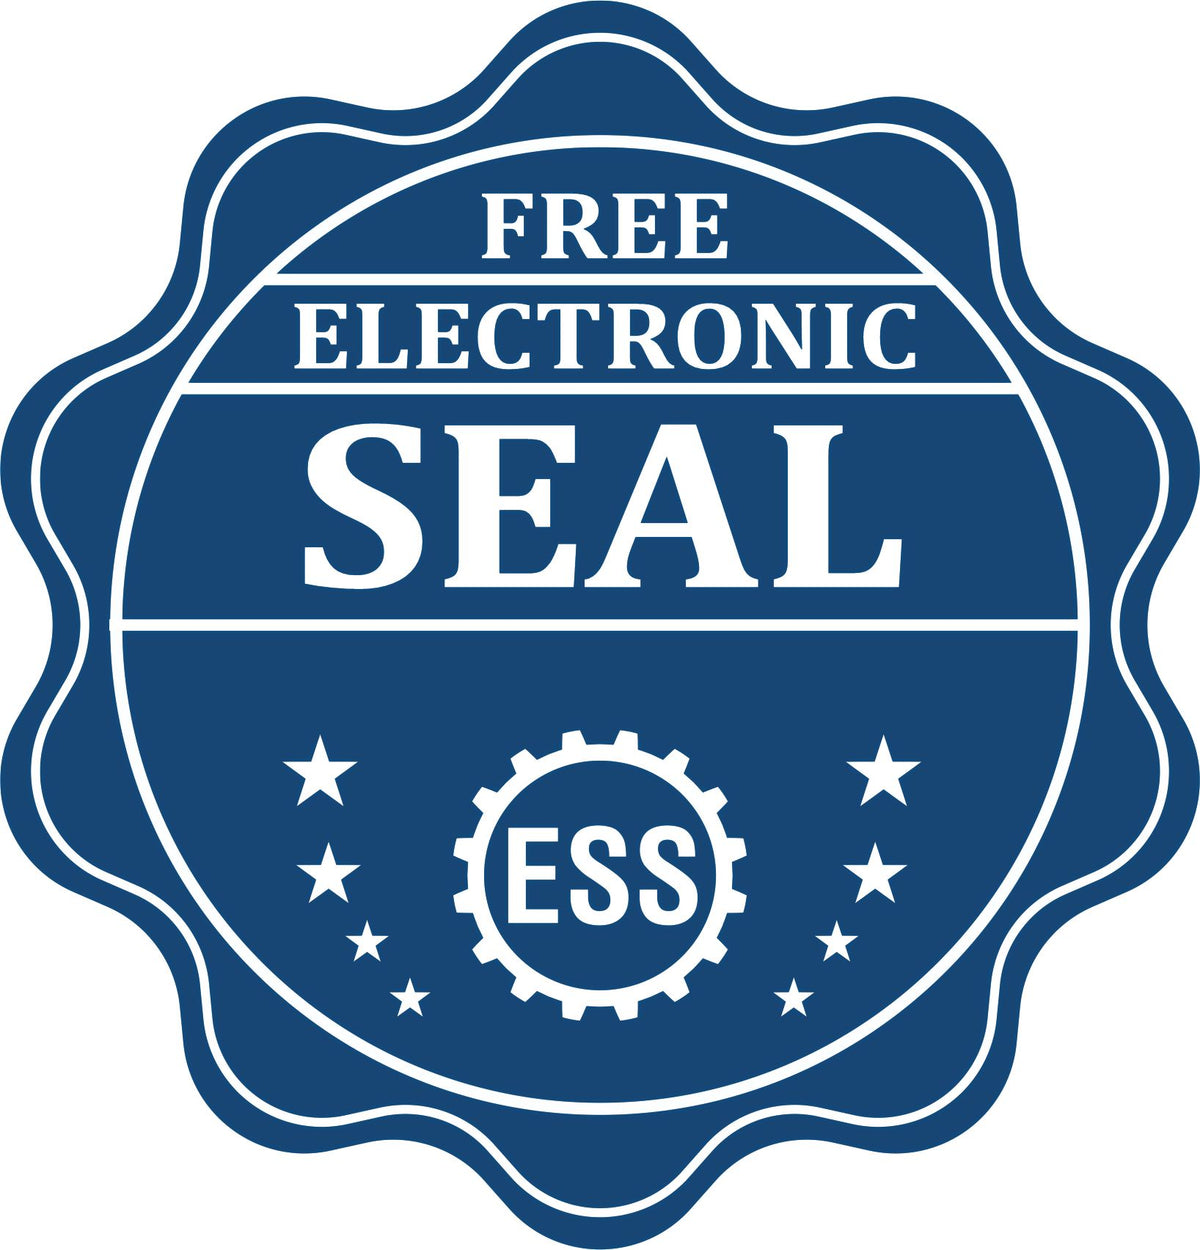 A badge showing a free electronic seal for the Heavy Duty Cast Iron Utah Engineer Seal Embosser with stars and the ESS gear on the emblem.